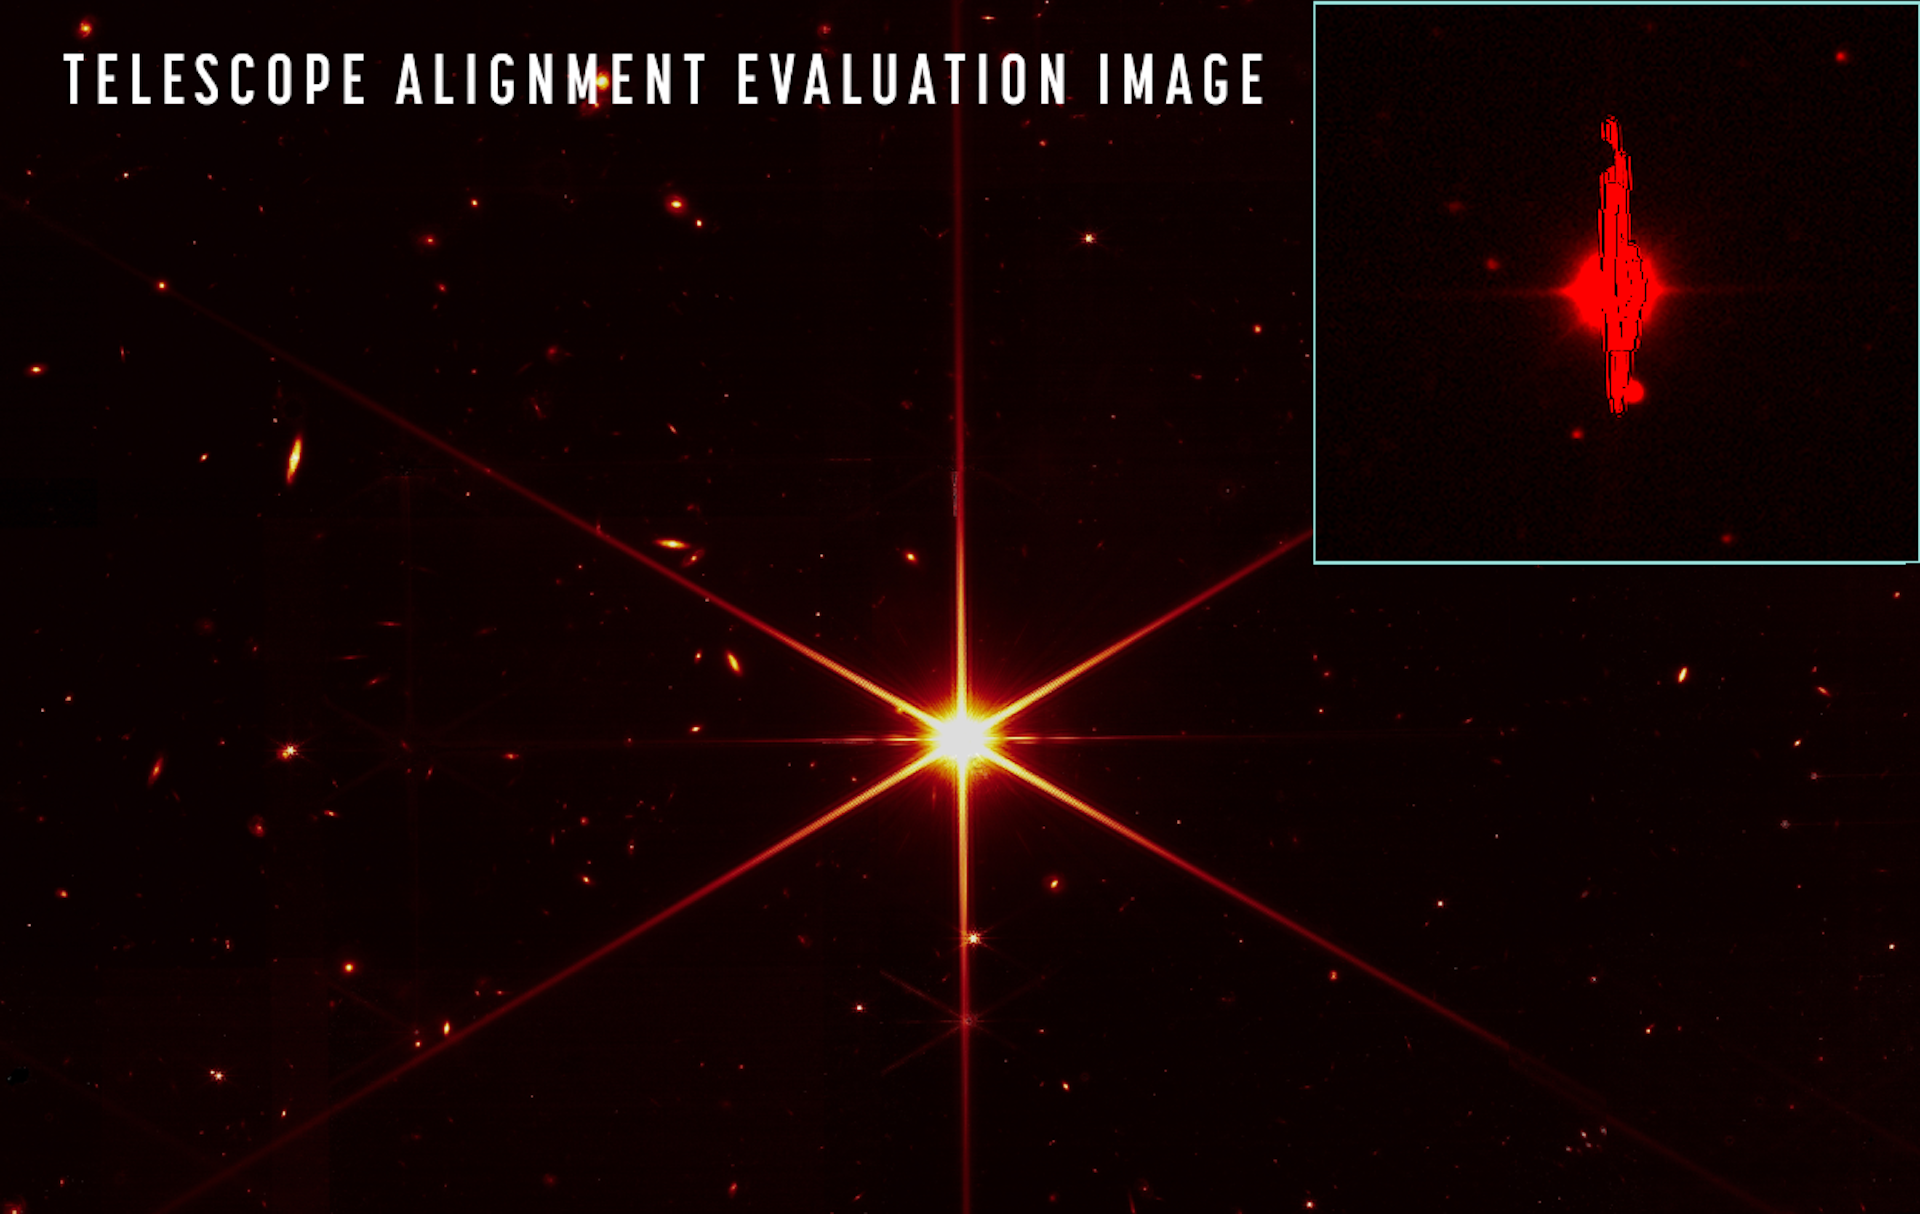 A bright six-pointed orange star with text above it stating it's a telescope alignment evaluation image. Inset in the top right corner shows a red blob with two points